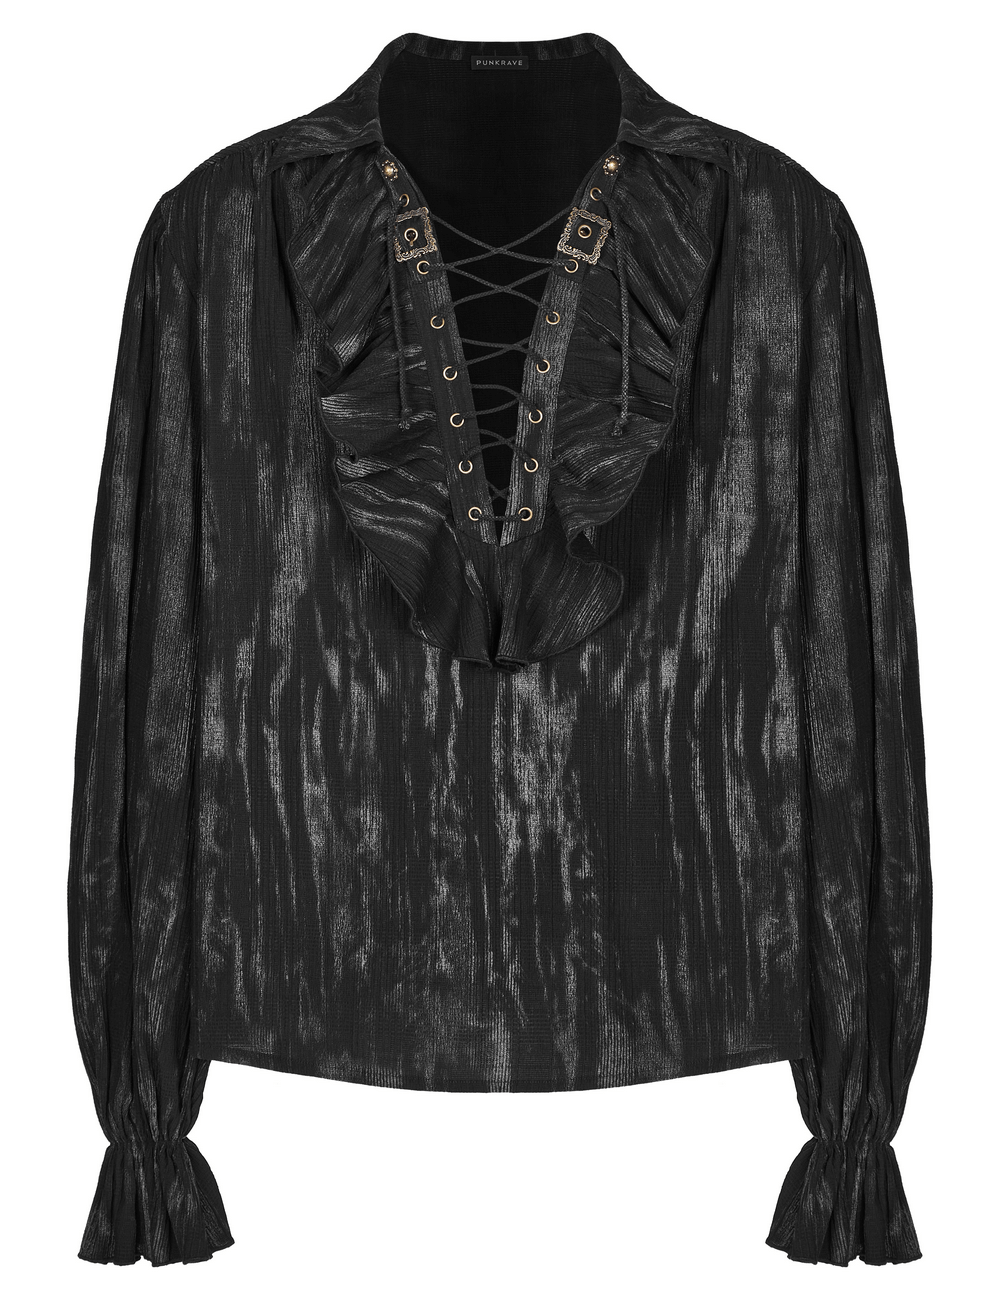 Crushed Gothic Tie-Dyed Jacquard Lace-Up Shirt - HARD'N'HEAVY